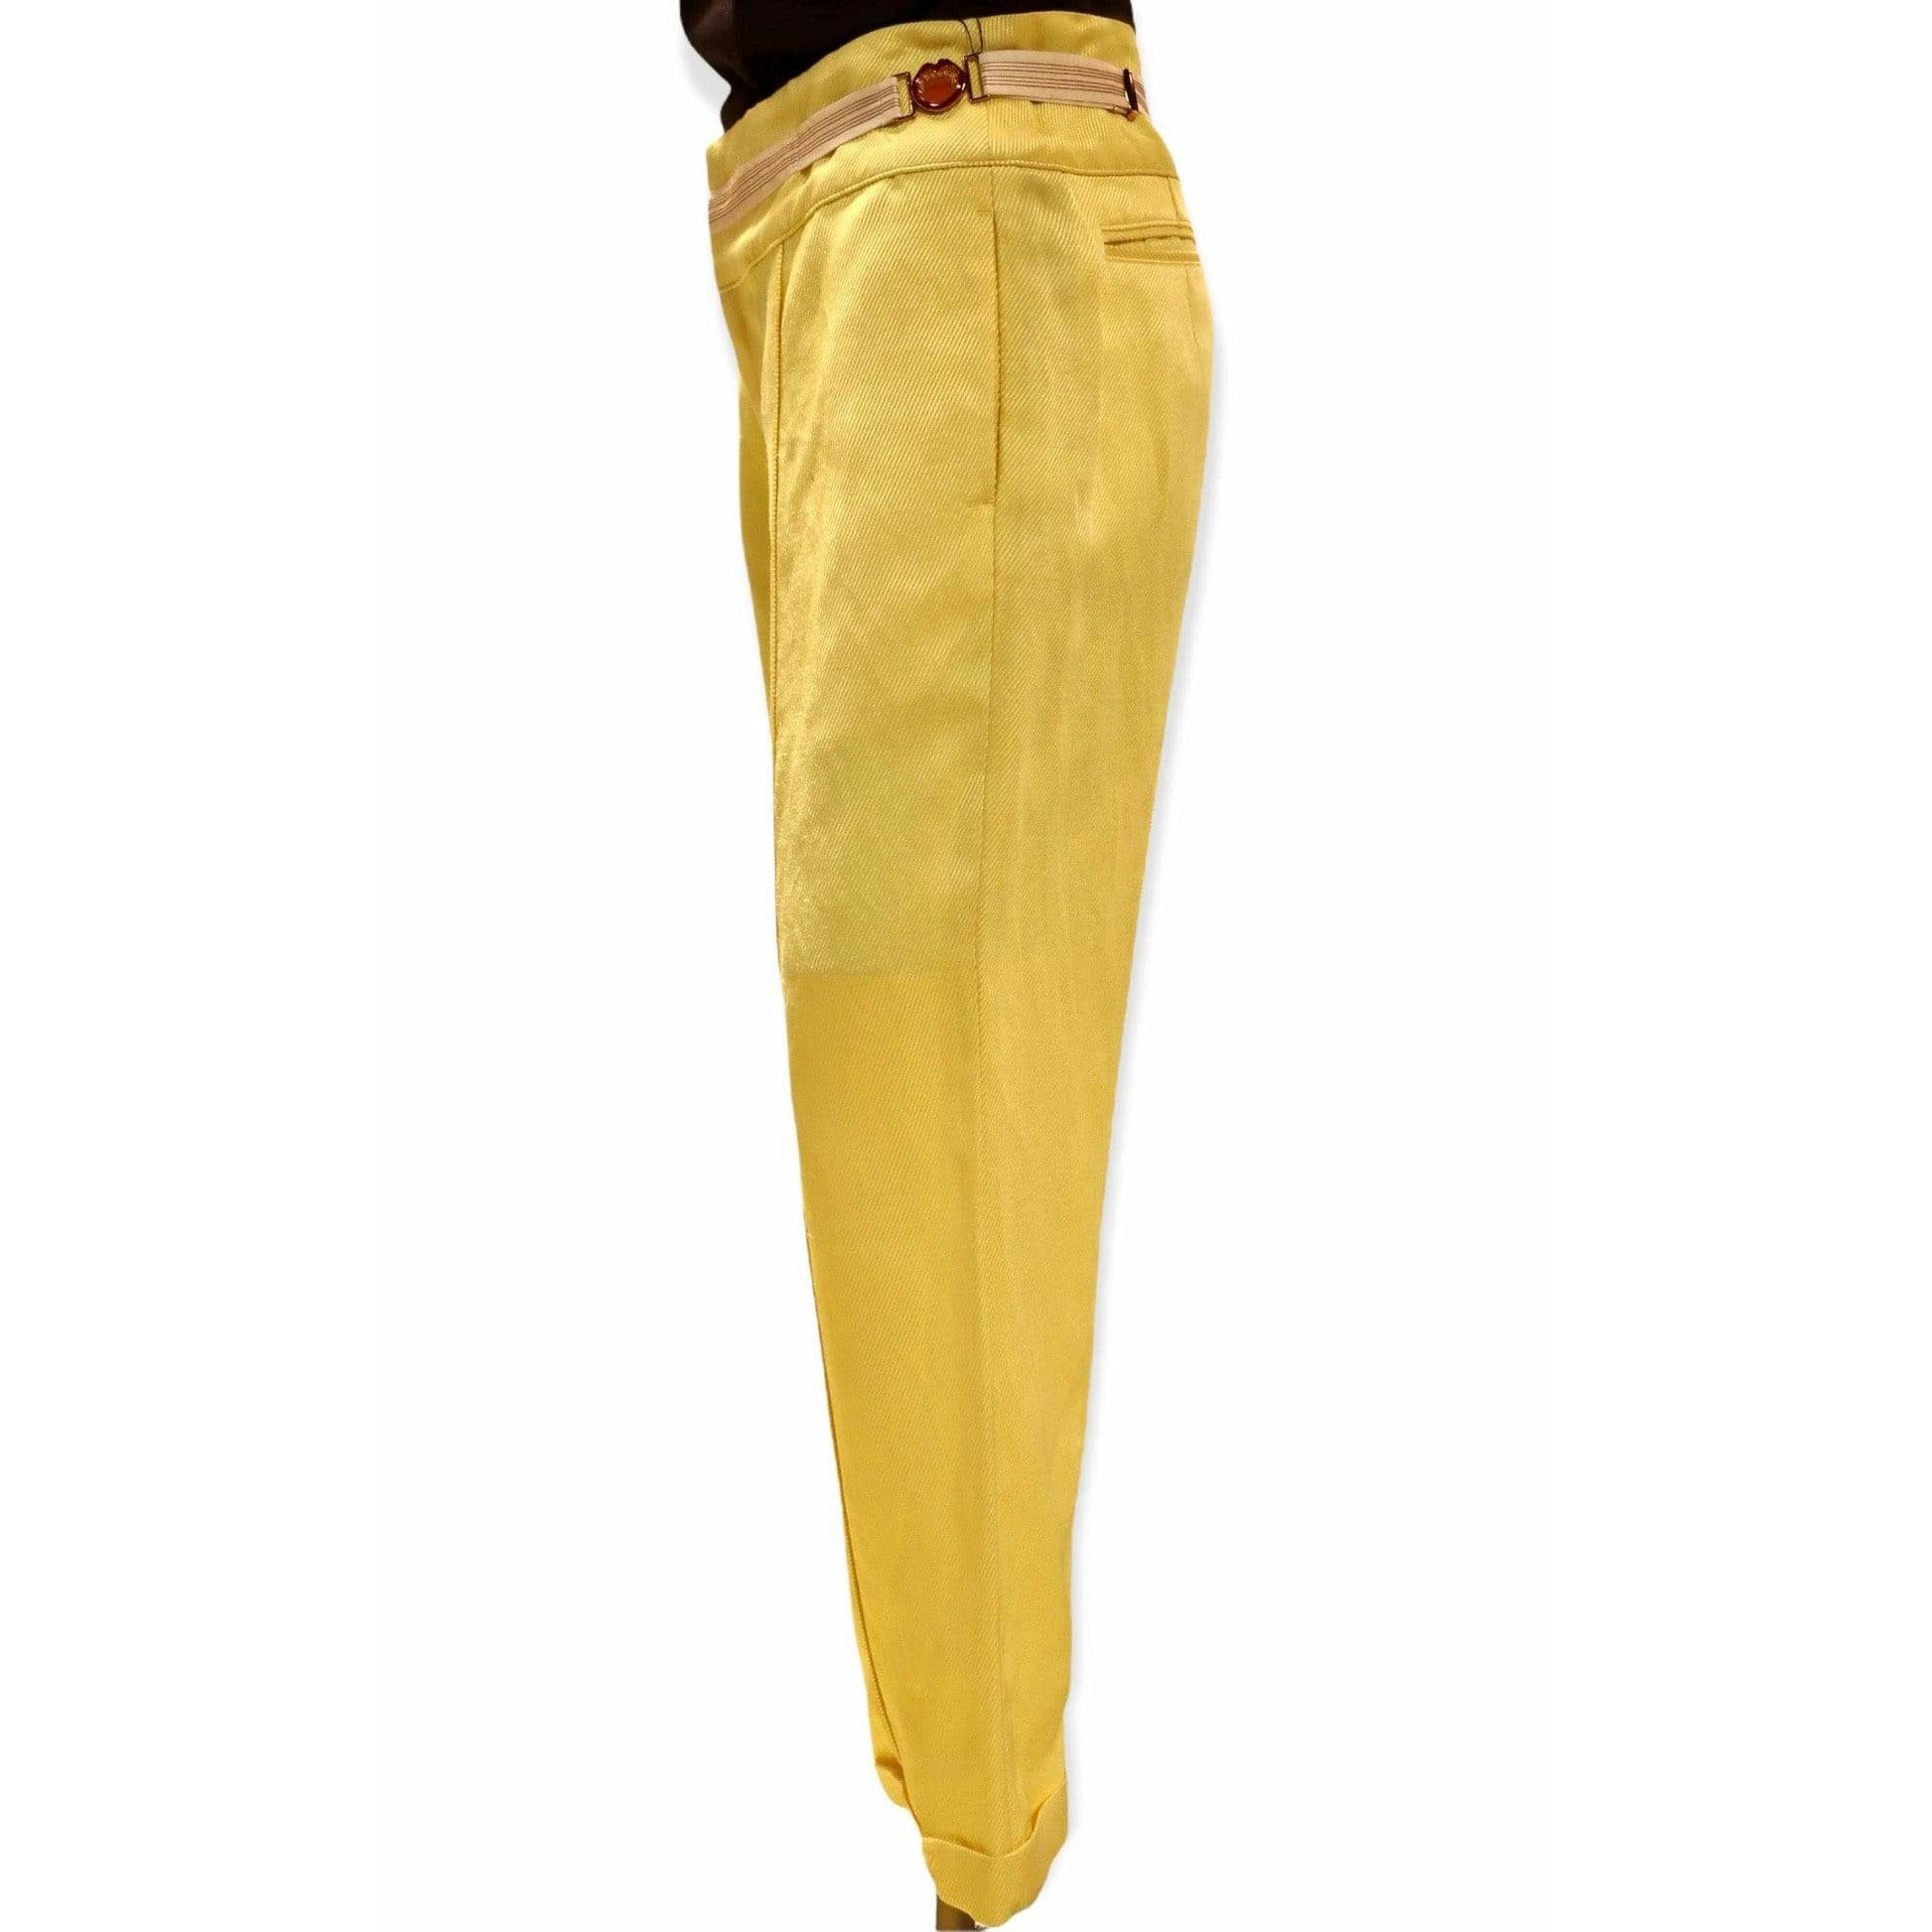 Pants undercover-yellow-crop-pant Sandy Brown